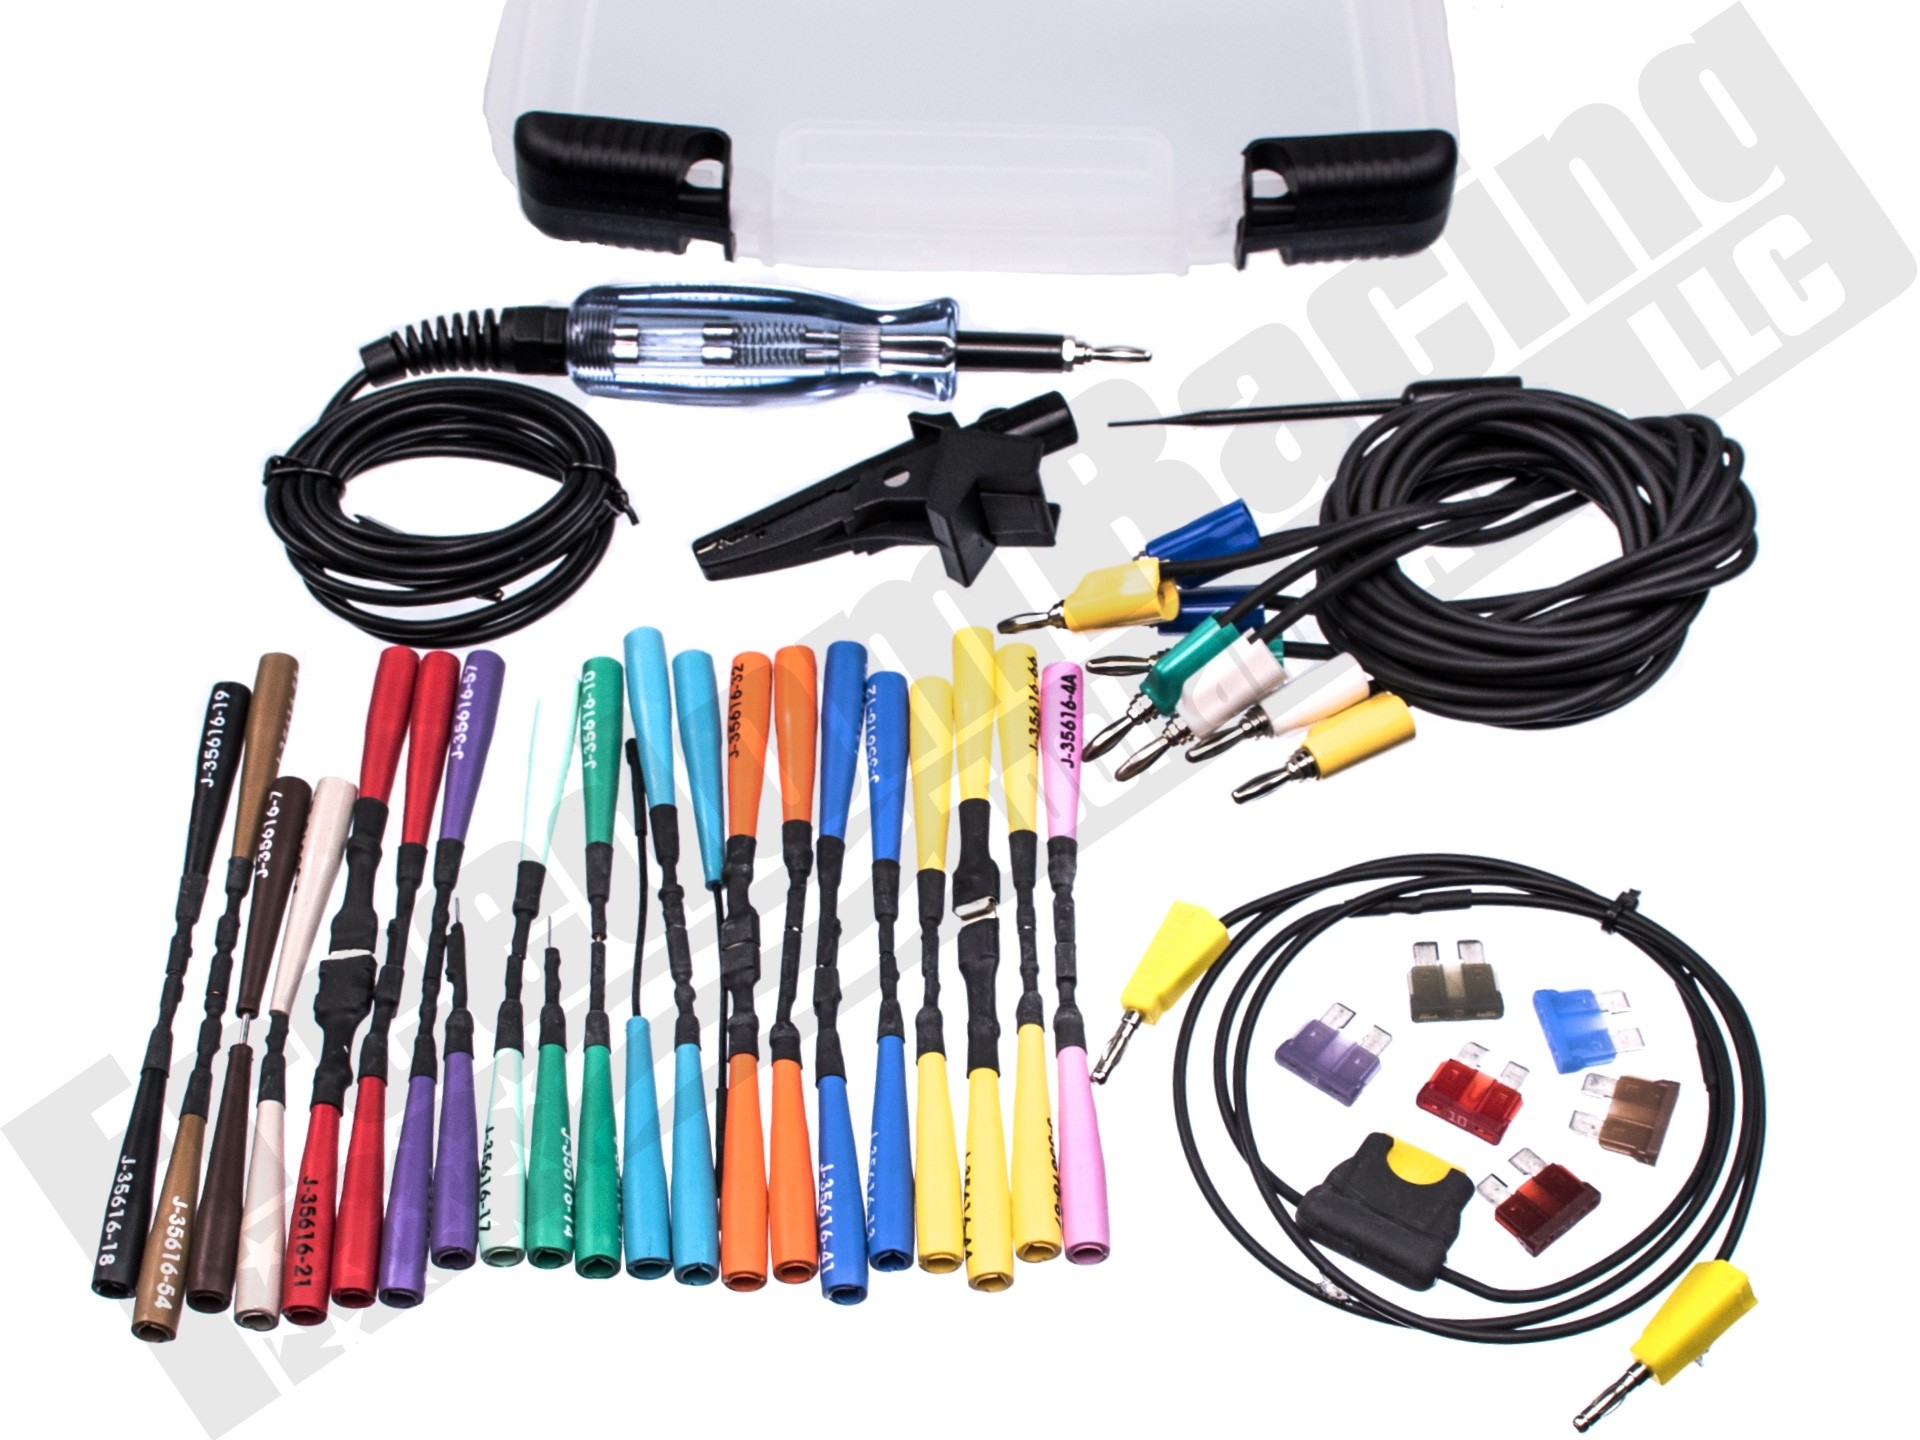 Don't guess GM TP-300-A Terminal Test Probe Wiring Kit Tool EL-35616-300-A Test